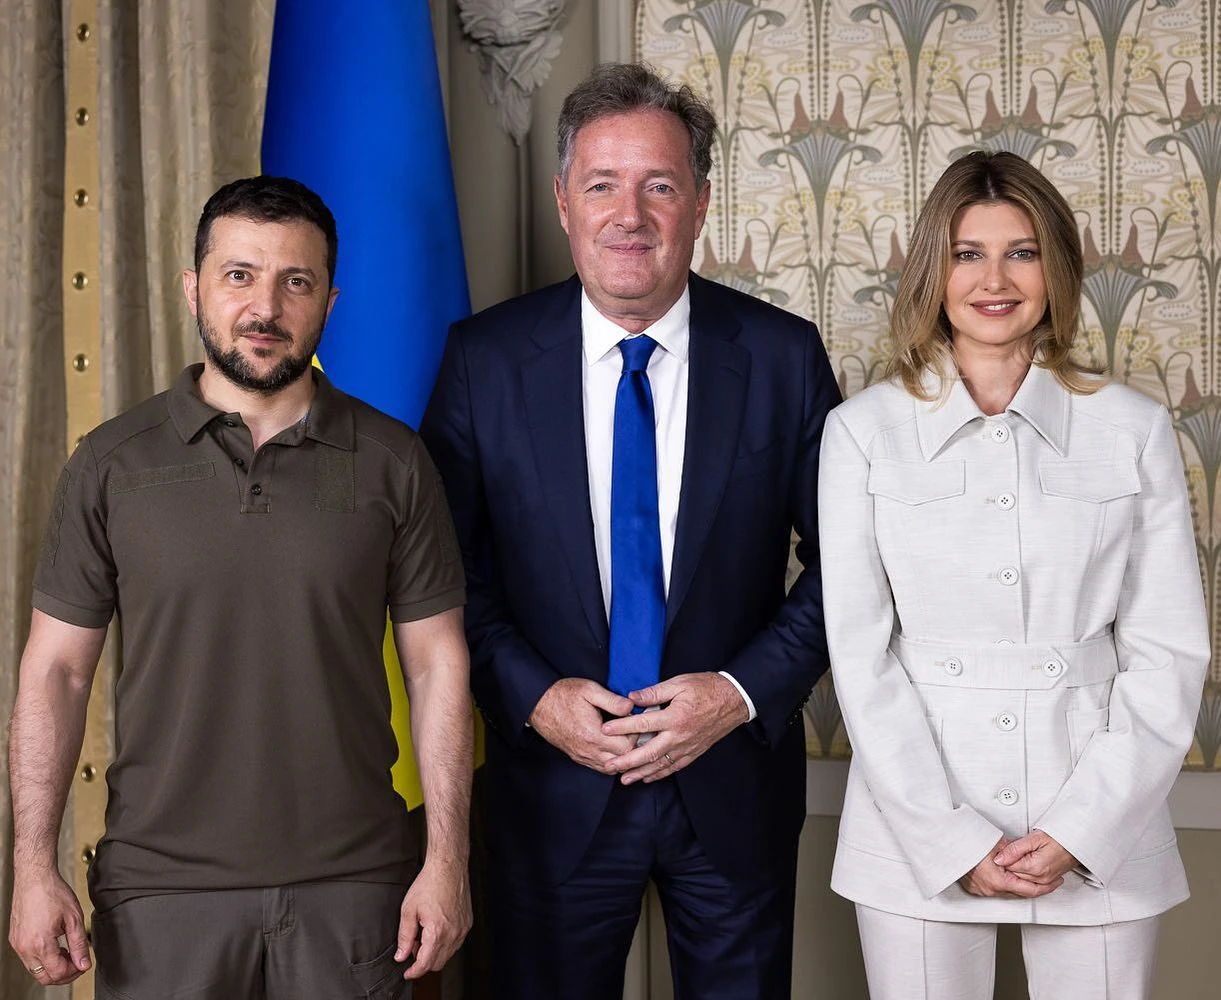 President Zelensky and First Lady Interviewed by Piers Morgan in Kyiv